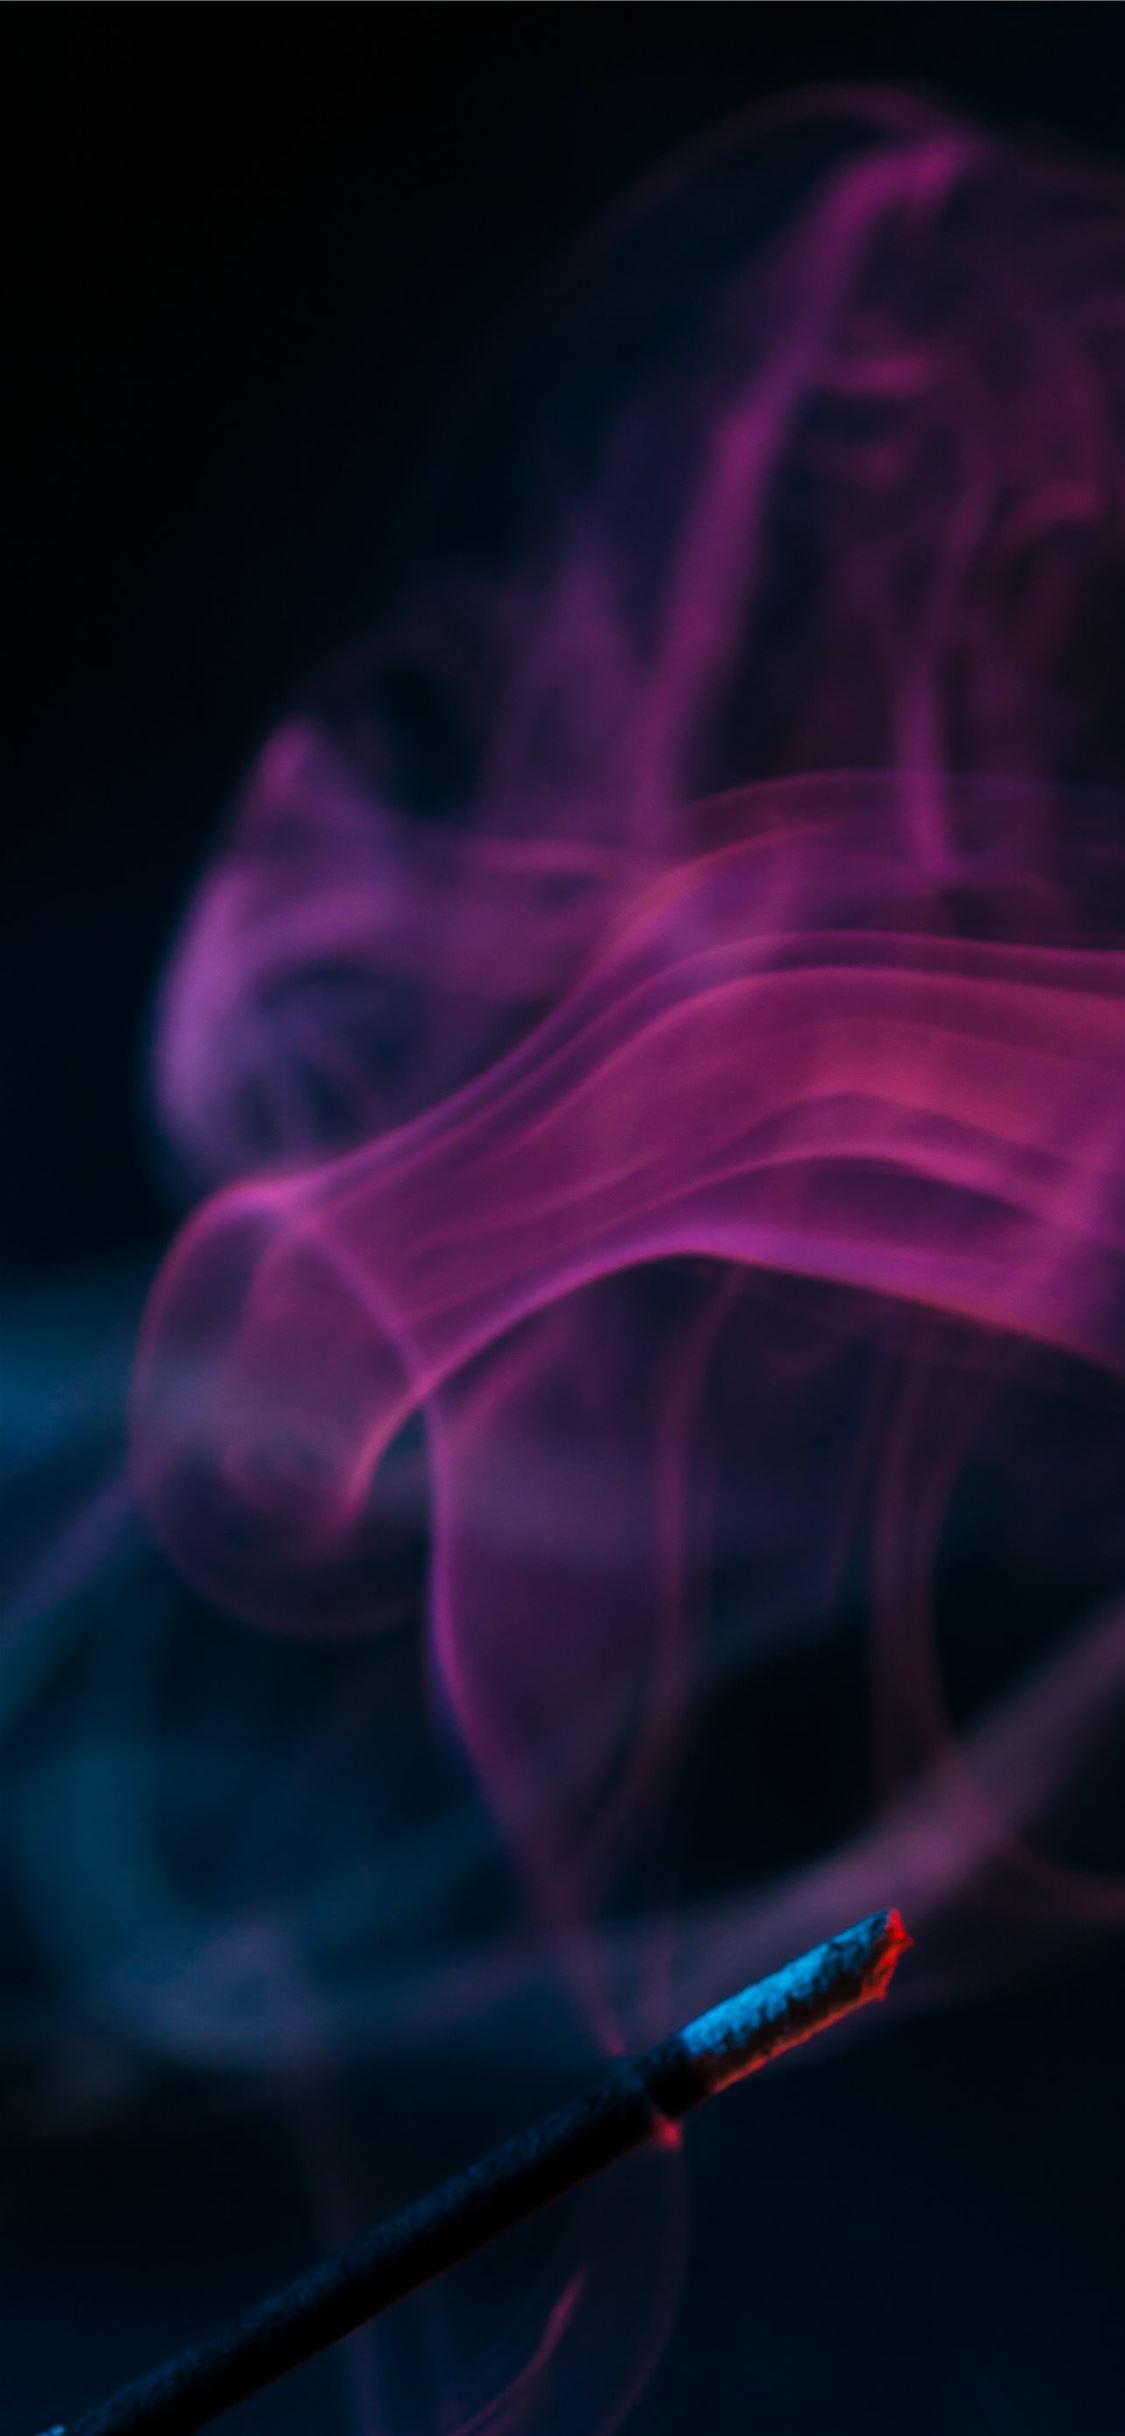 IPhone wallpaper of incense stick with smoke in the dark - Smoke